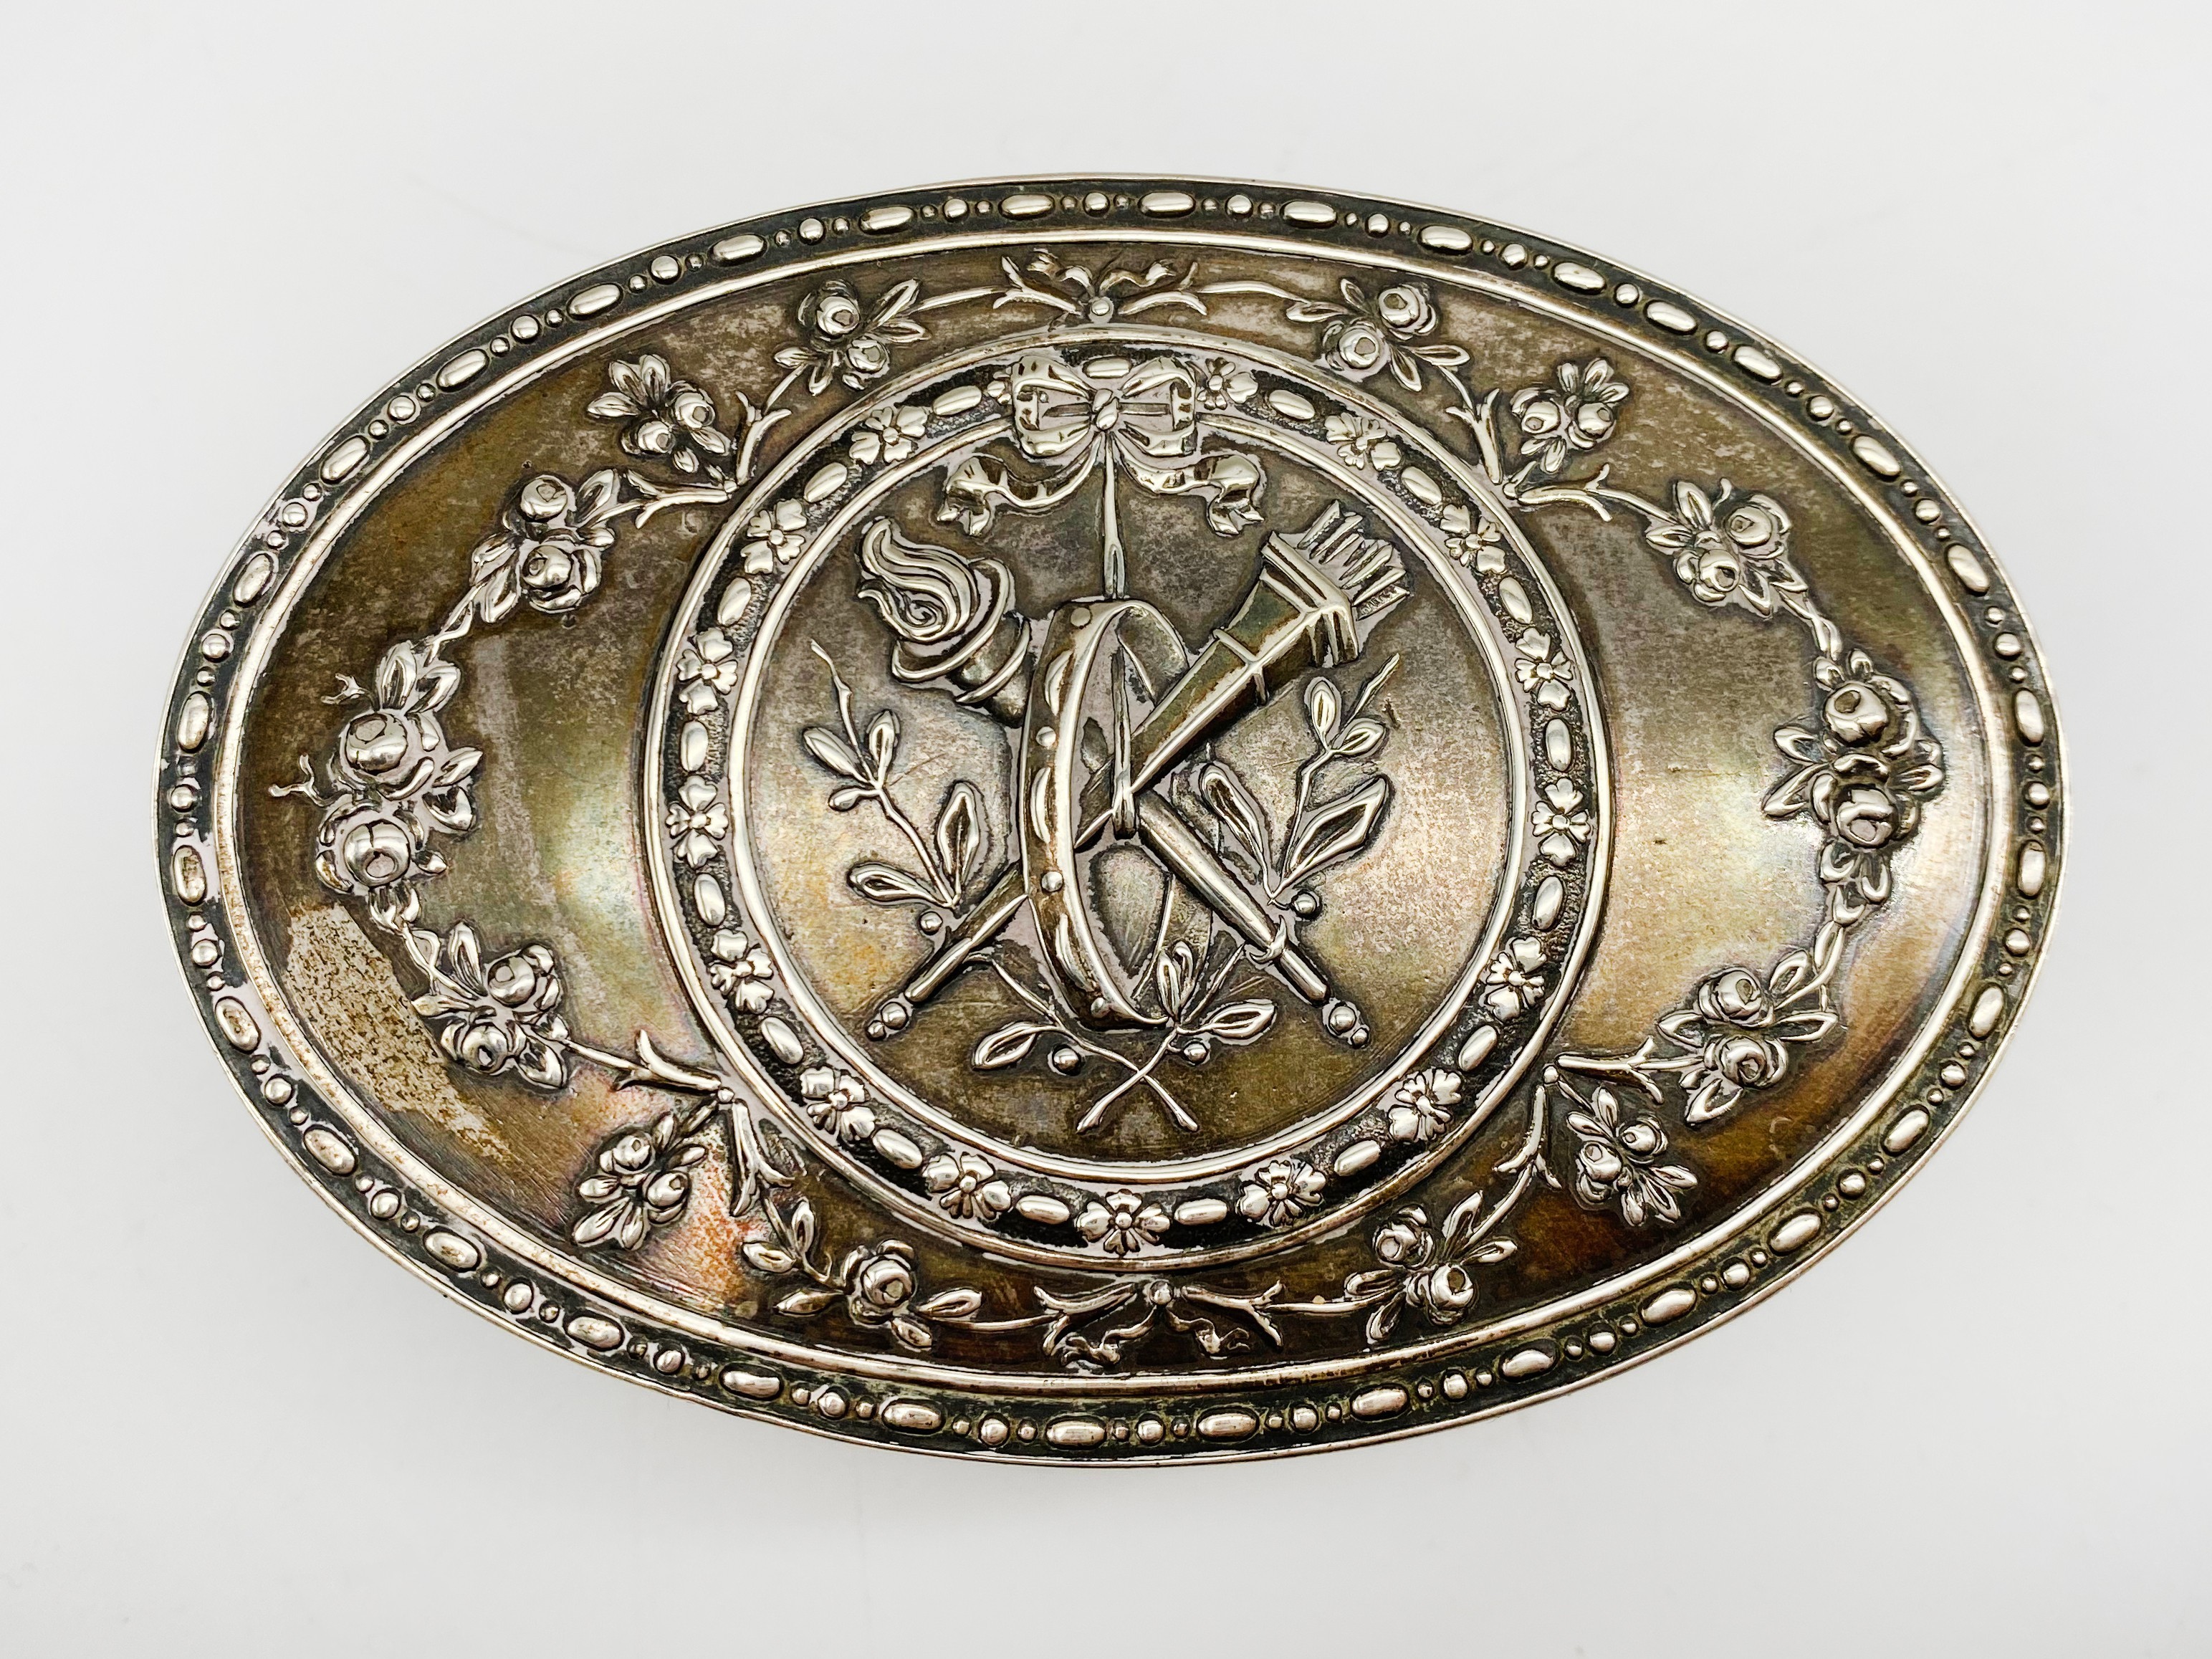 ANTIQUE HALLMARKED HANAU SILVER REPOUSSE TABLE SNUFF BOX IMPORTED HALLMARKED FOR BOAZ MOSES LANDECK - Image 2 of 7